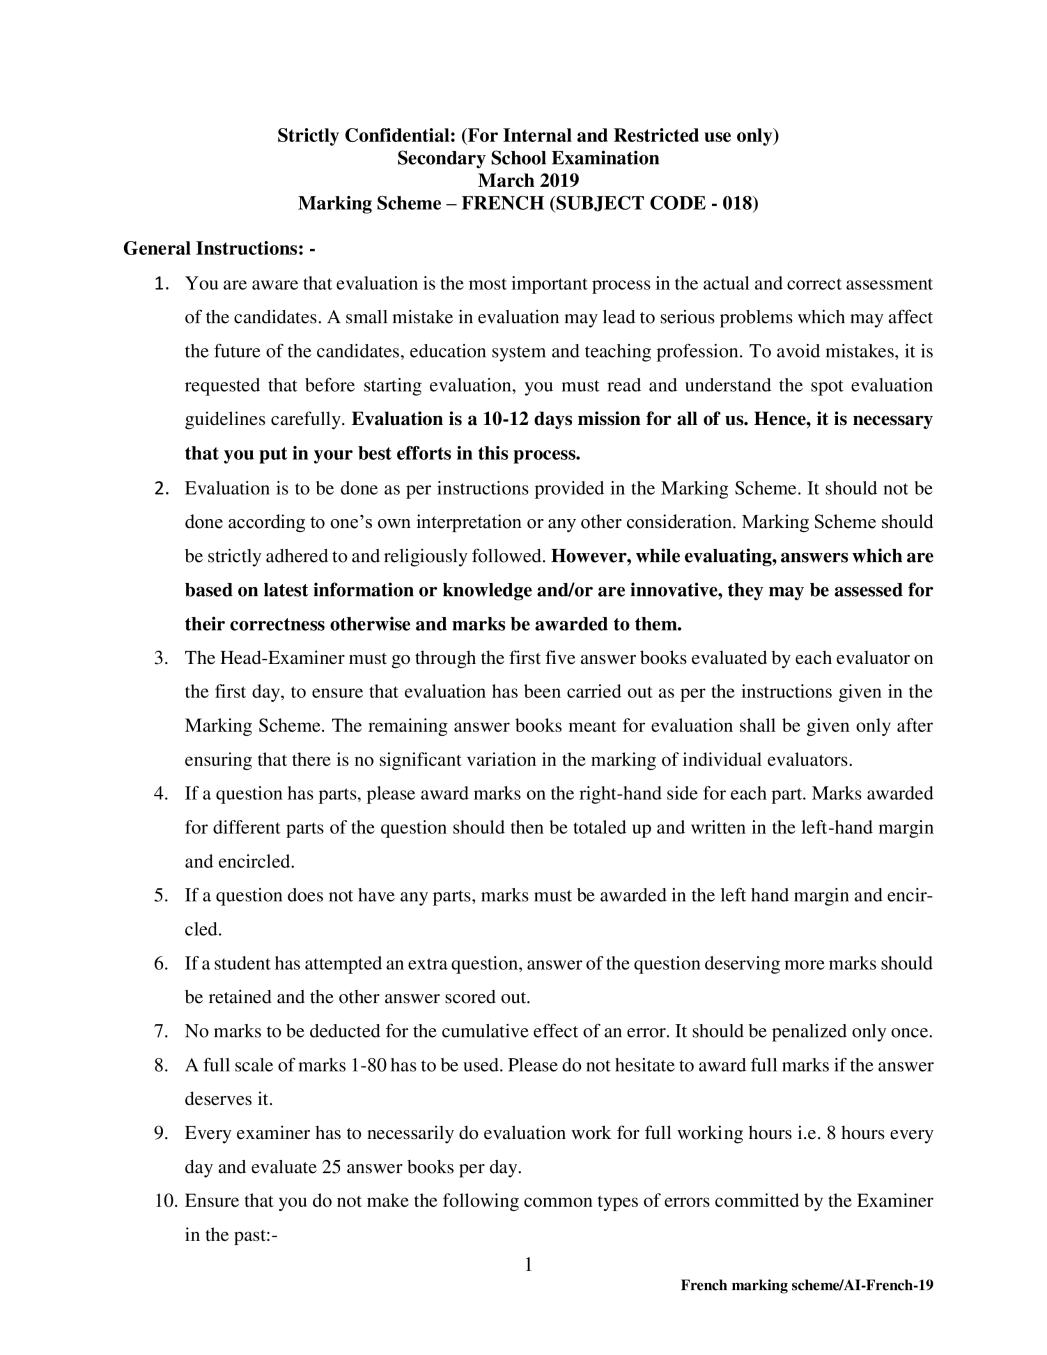 CBSE Class 10 French Question Paper 2019 Solutions - Page 1